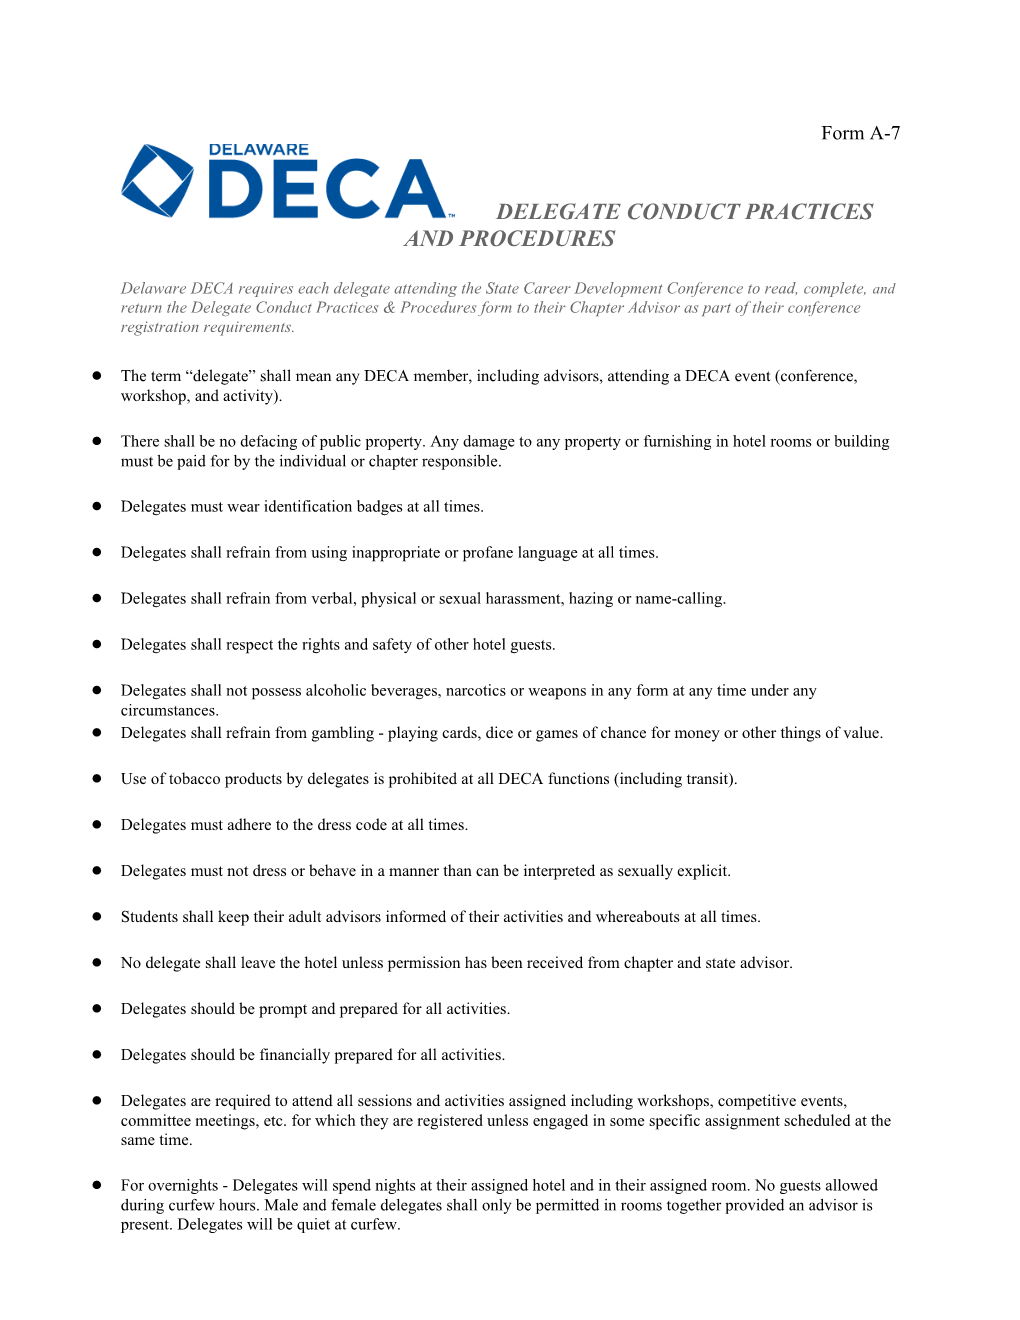 Delegate Conduct Practices and Procedures